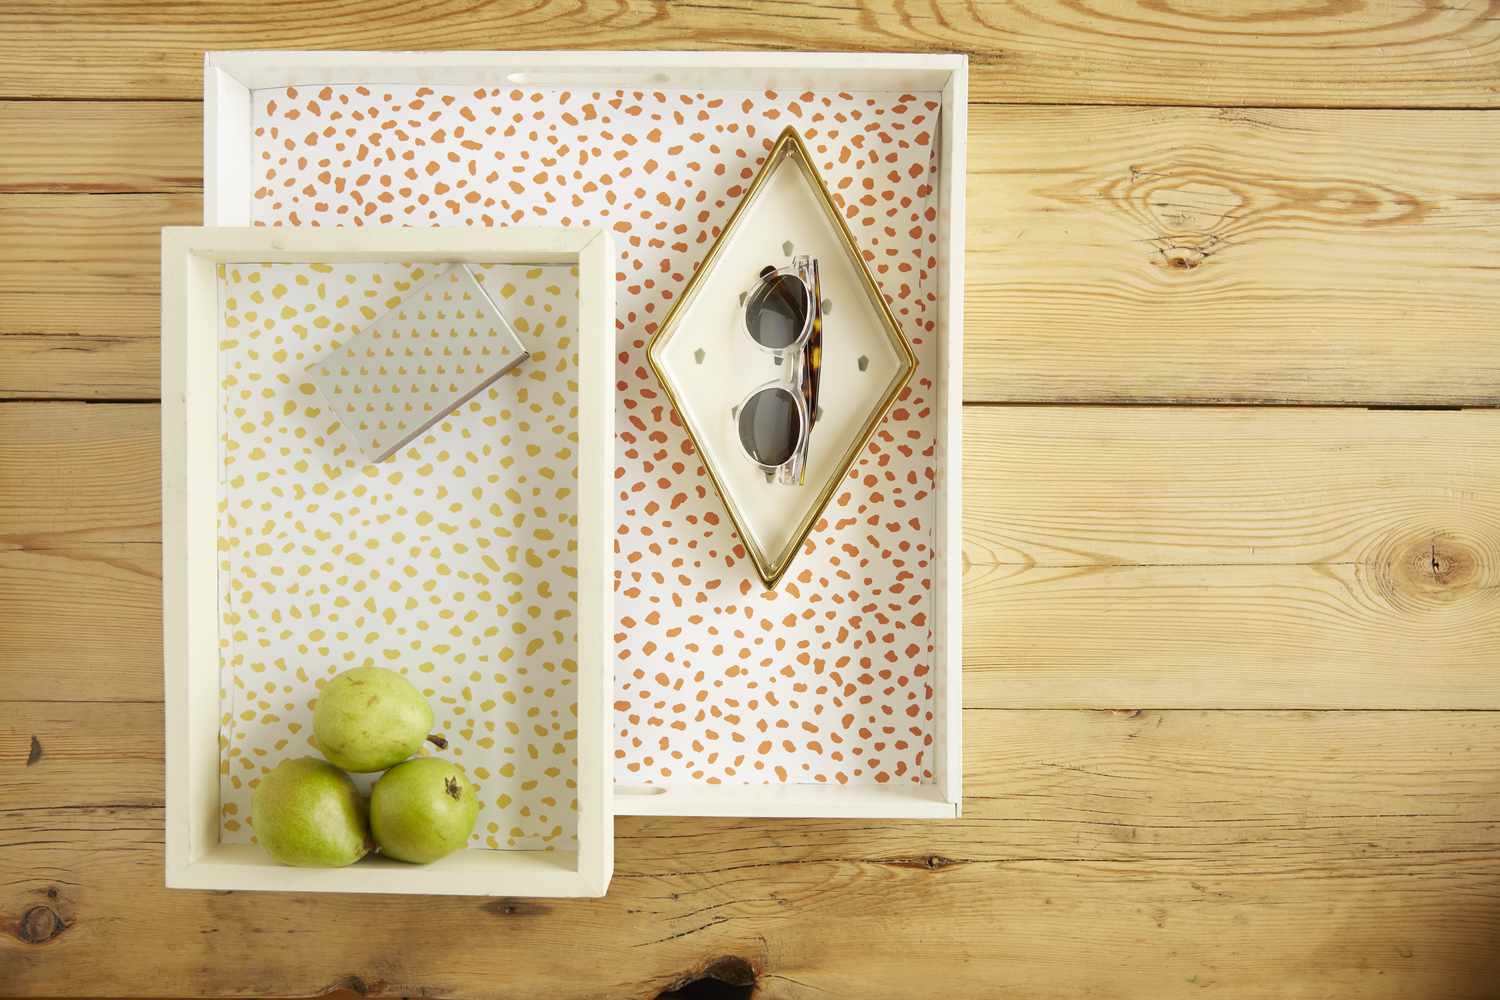 Chasing Paper decorative tray